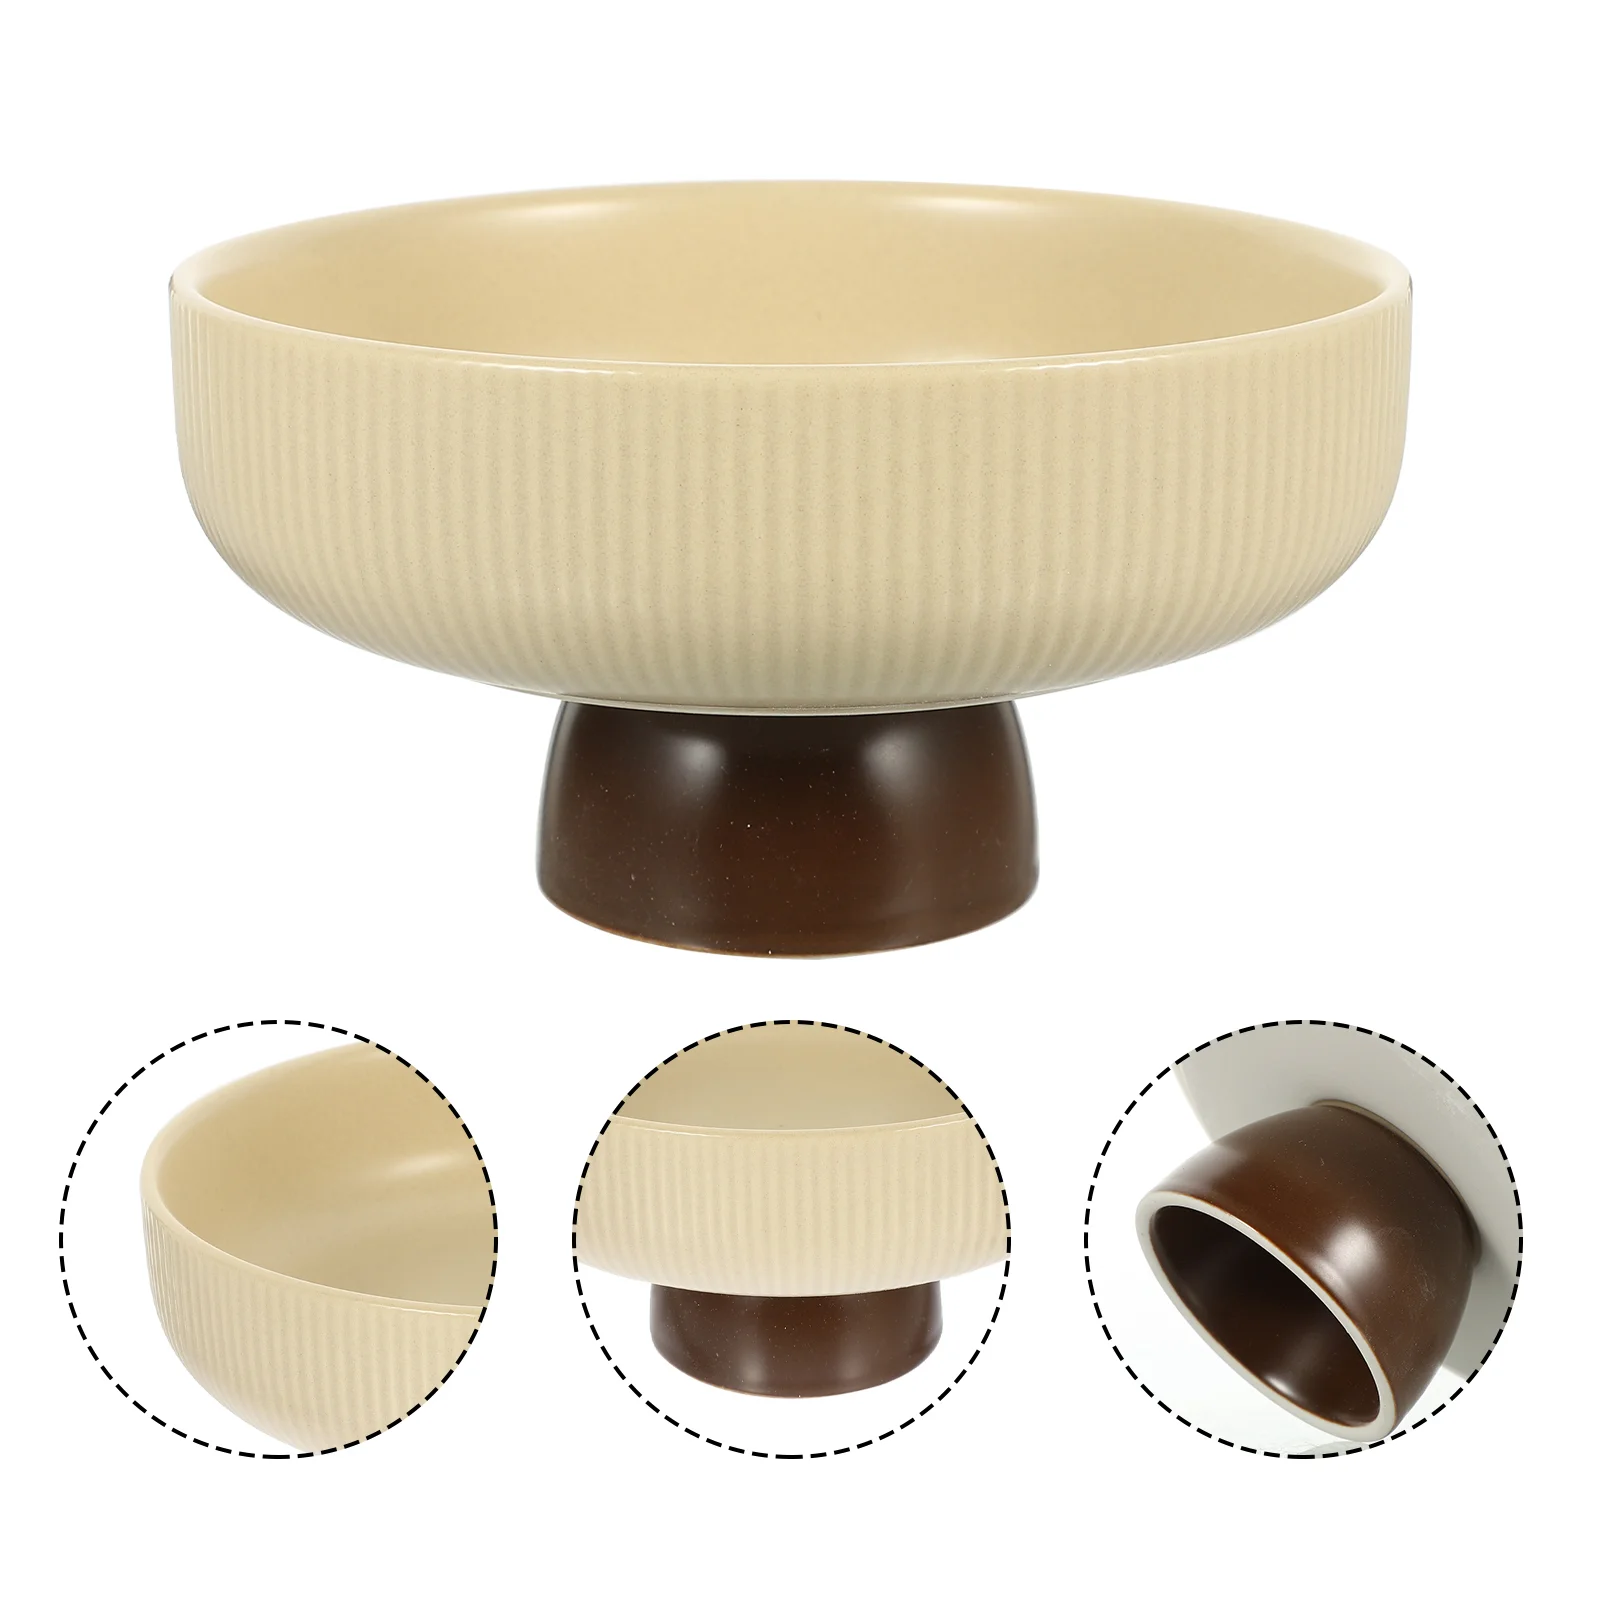 

Bowl Footed Fruit Ceramic Dessert Cup Serving Holder Dish Bowls Plate Berry Buffet Stand Salad Plates Porcelain Display Tower